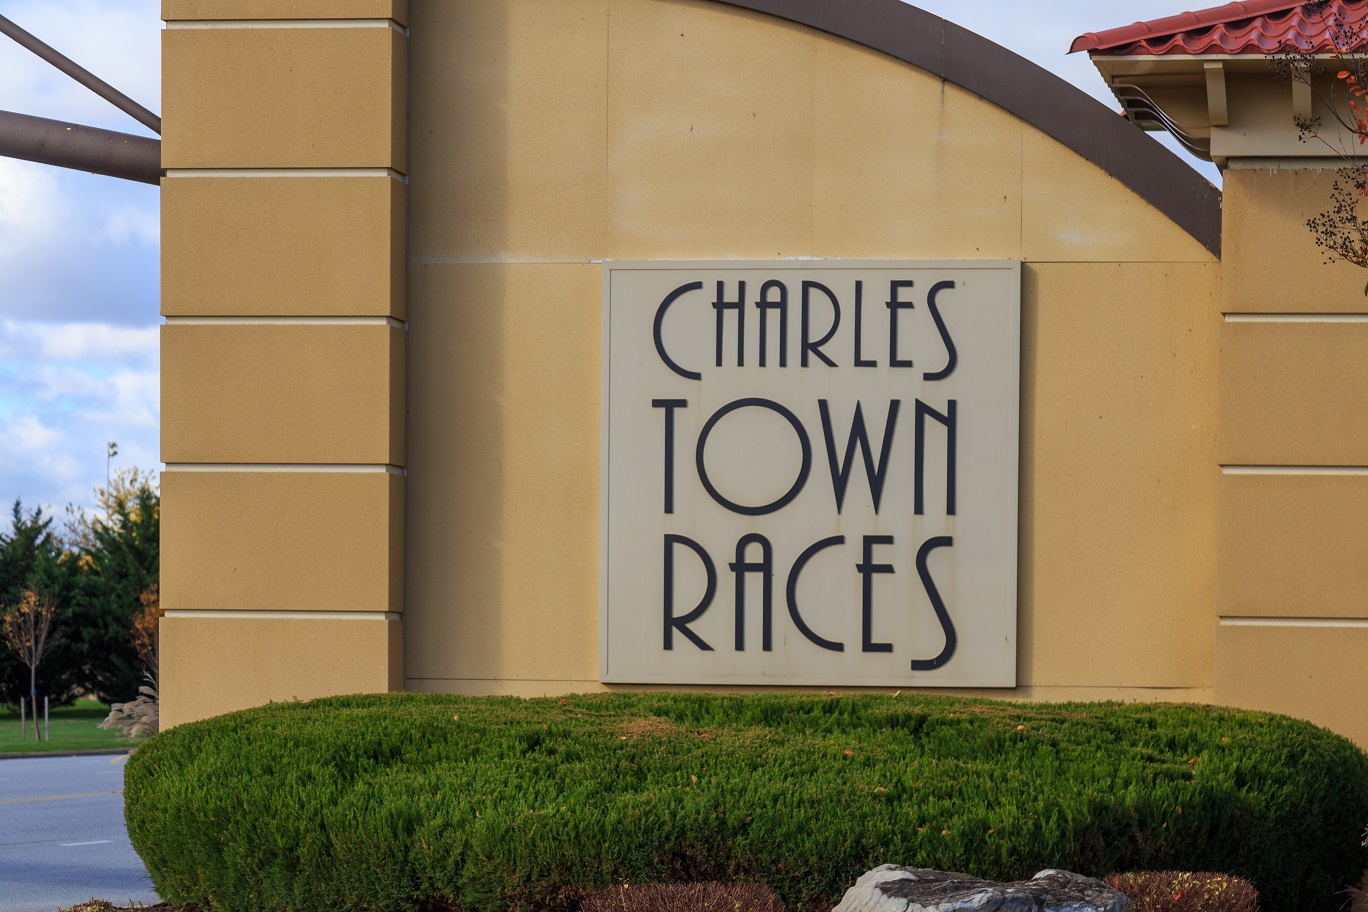 Charles Town, WV: Entrance sign at the Hollywood Casino Charles Town Races complex operated by Penn National Gaming on November 3, 2018, in Charles Town, WV where the highest number of horse deaths at any one track have occurred in 2021. 

Photo credit: Shutterstock royalty-free stock photo ID: 1640257198
By George Sheldon